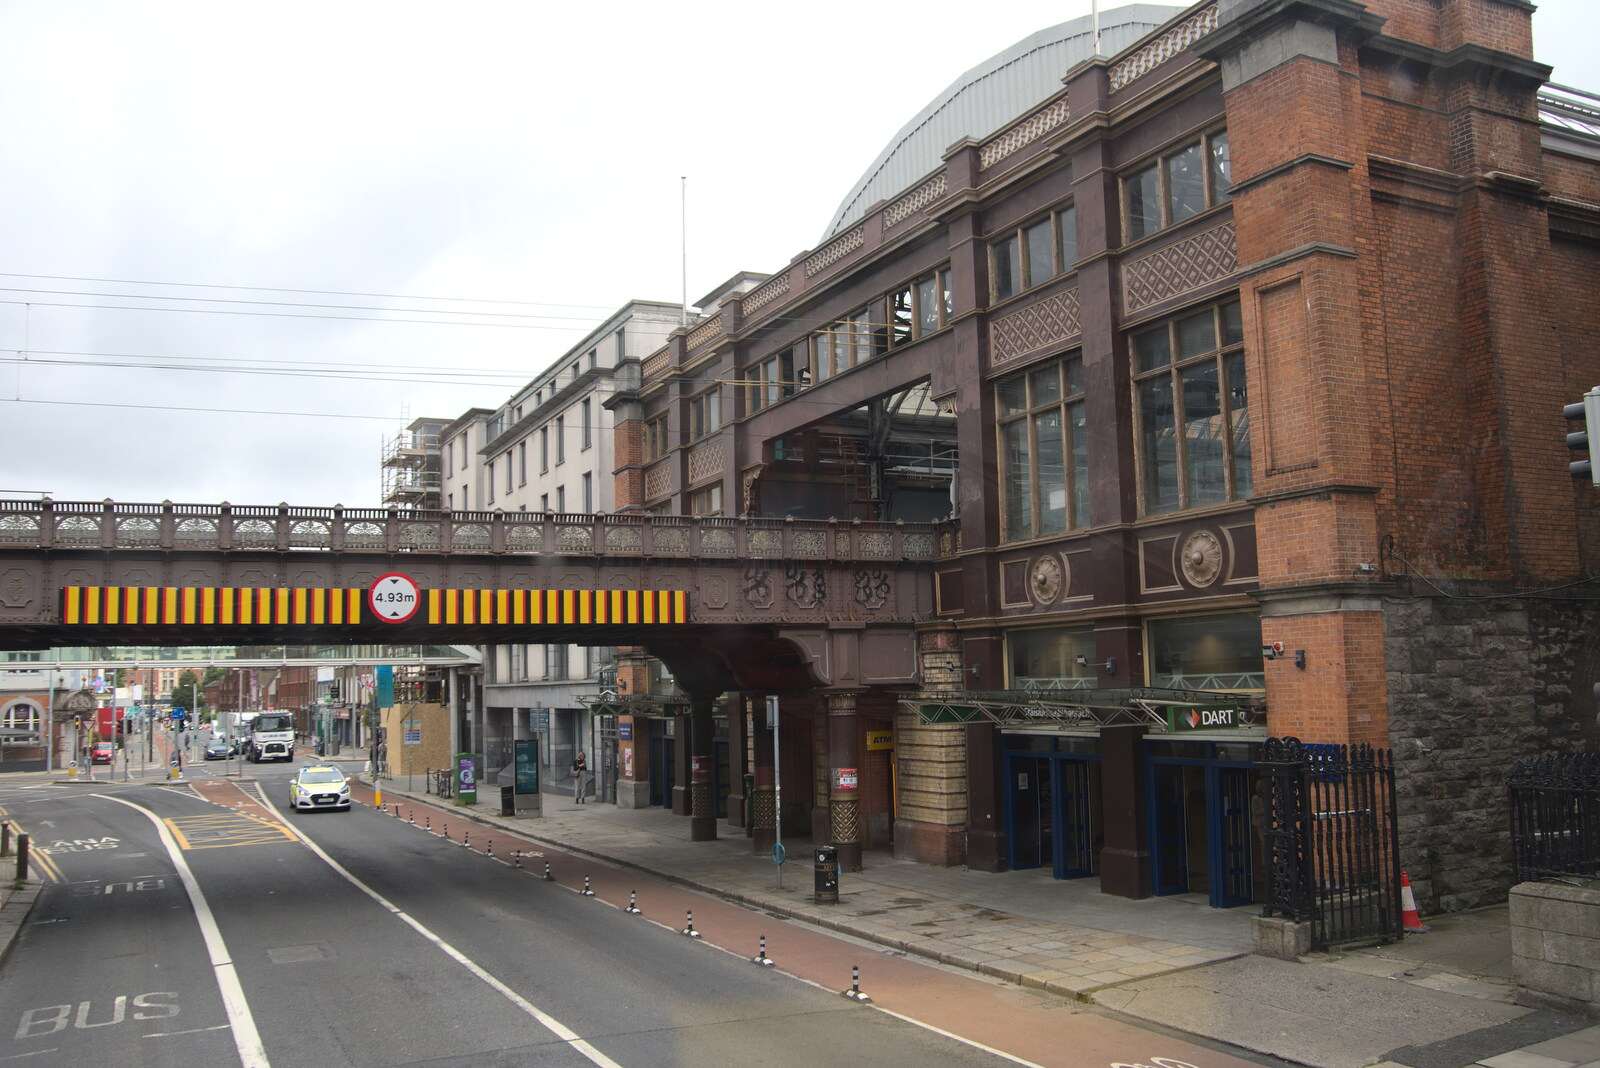 Pearse Street station from the top of the bus from A Trip to Noddy's, and Dublin City Centre, Wicklow and Dublin, Ireland - 16th August 2021